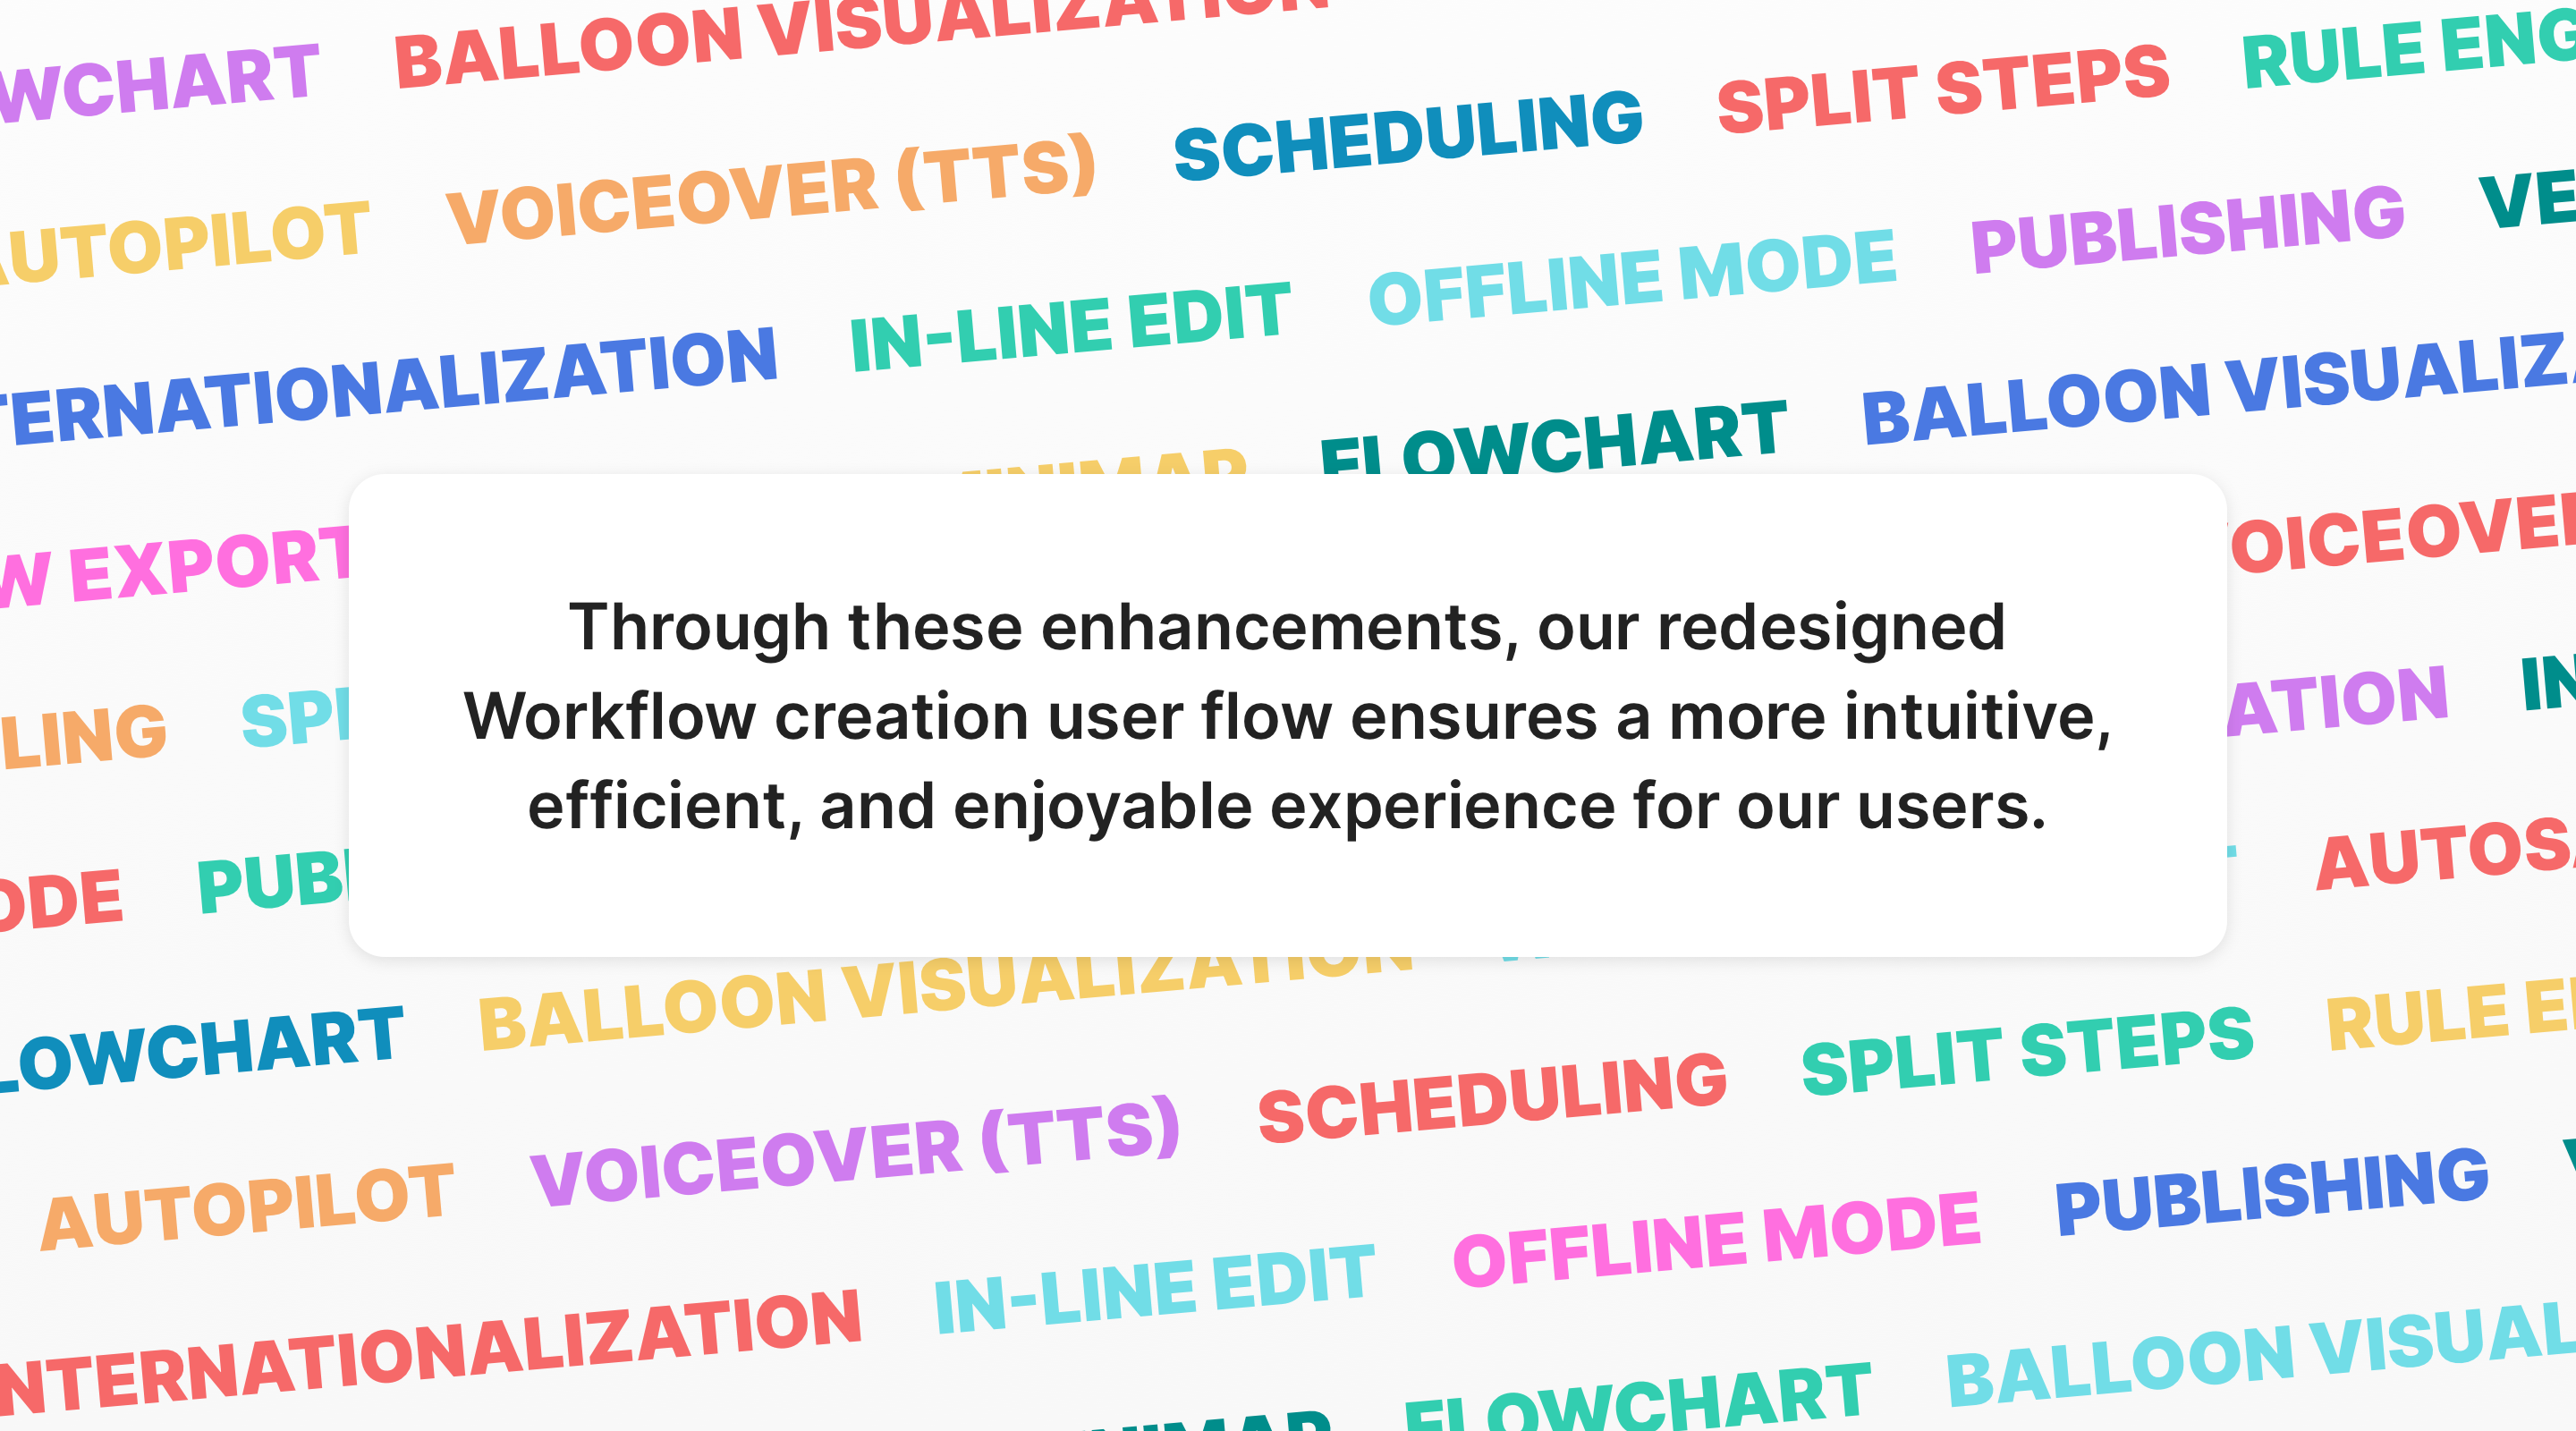 Through these enhancements, our redesigned Workflow creation user flow ensures a more intuitive, efficient, and enjoyable experience for our users.